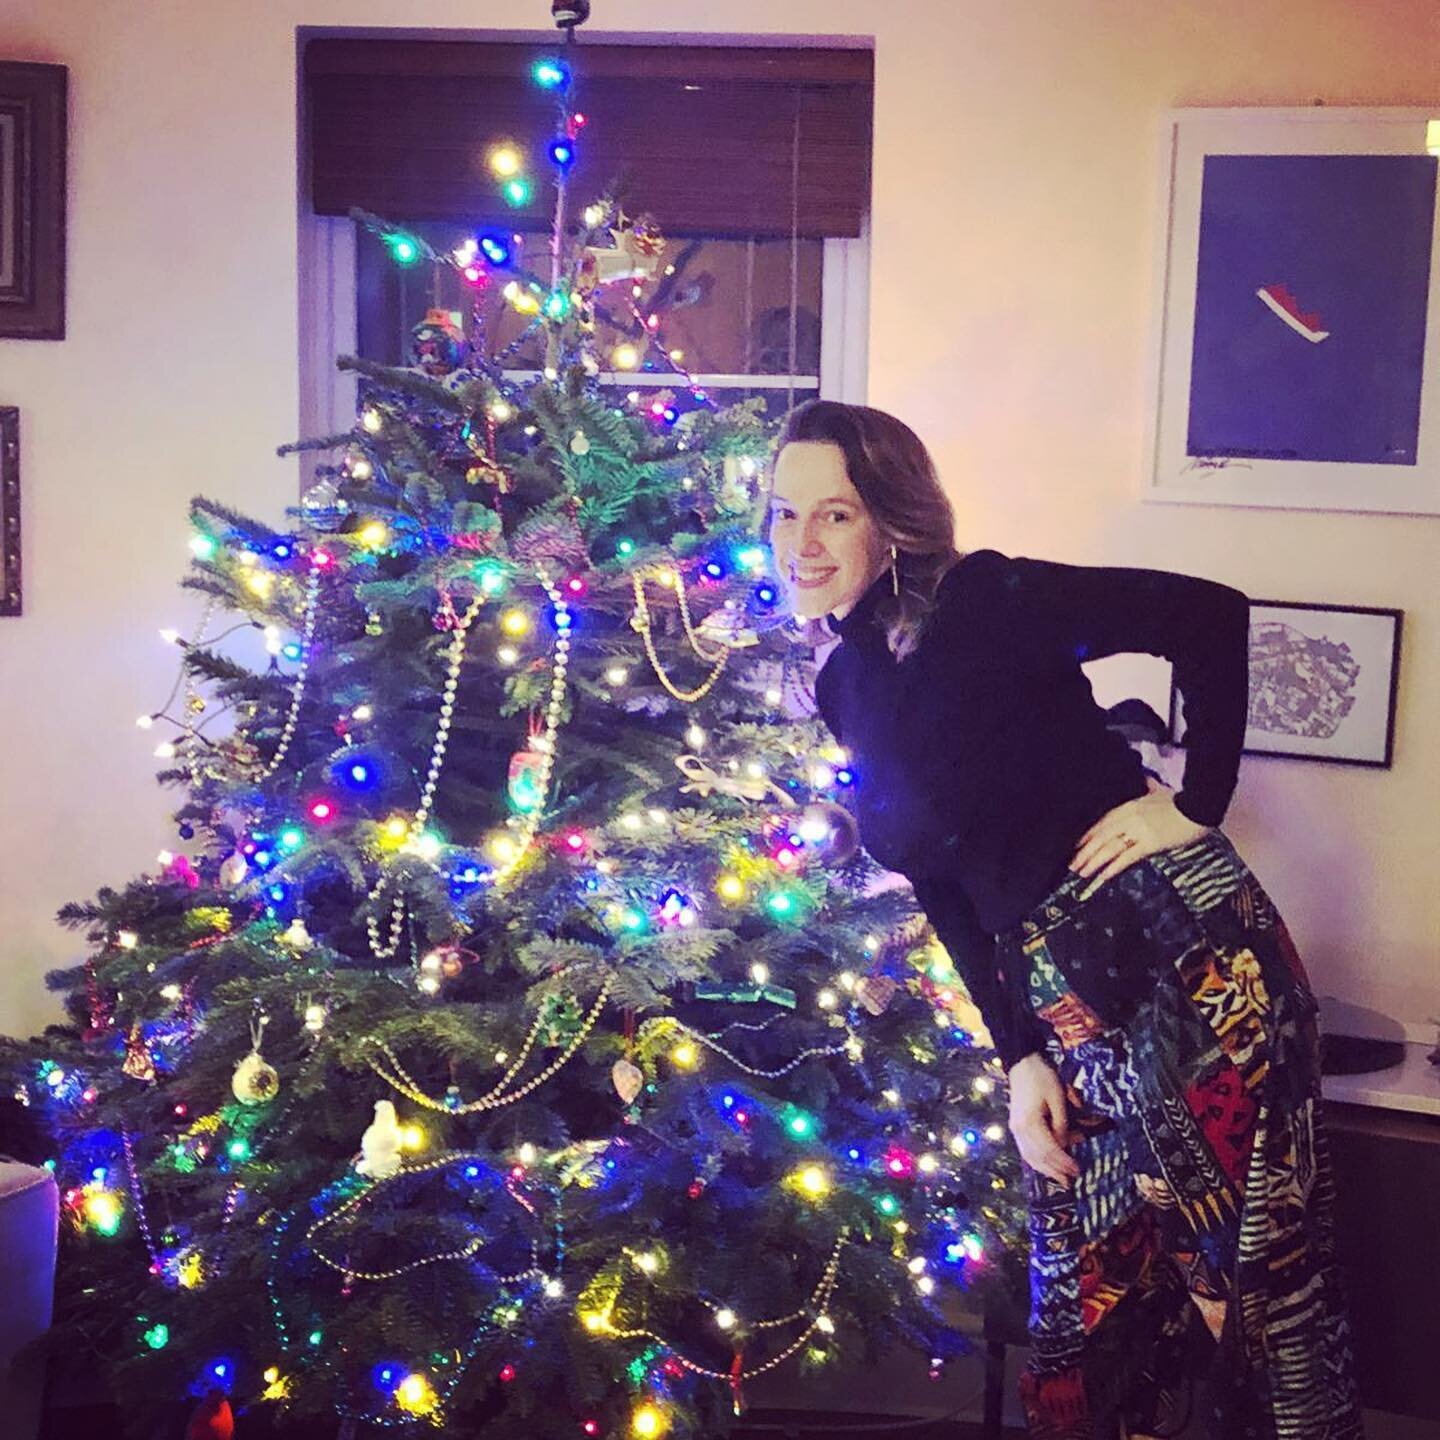 Introducing Matthew McConifer our Mardi Gras Christmas Tree! (Complete with homemade COVID bauble) Taking the baton from last year&rsquo;s Treefir Southerland and Amy Pinehouse and Spruce Springsteen before him.
It&rsquo;s a week early this year but 